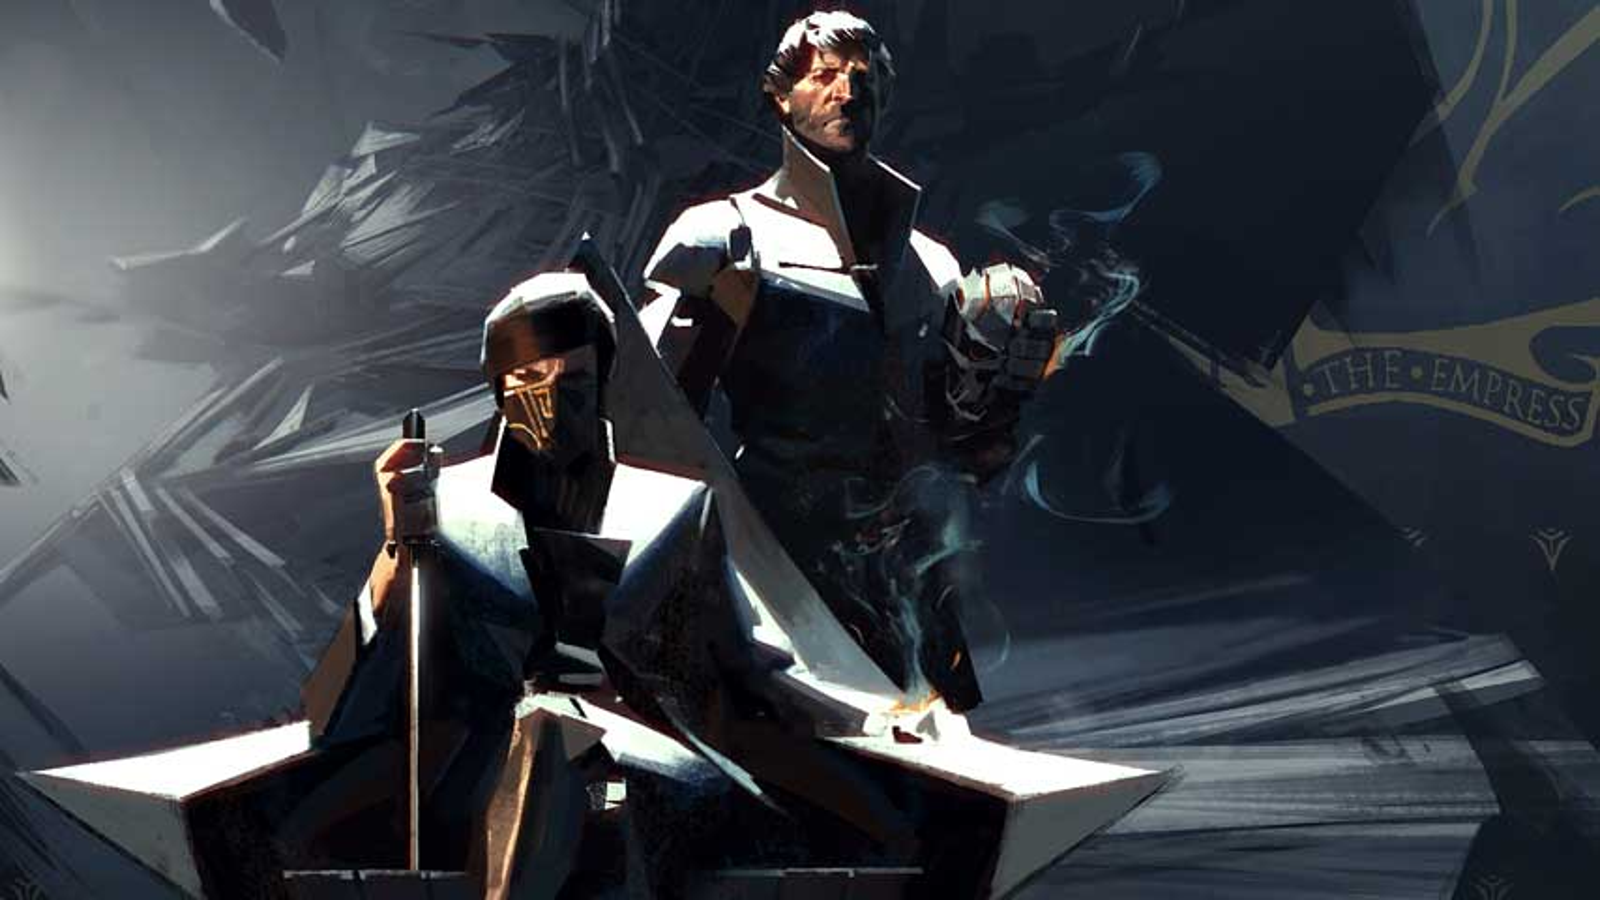 Dishonored 2, PC Steam Game